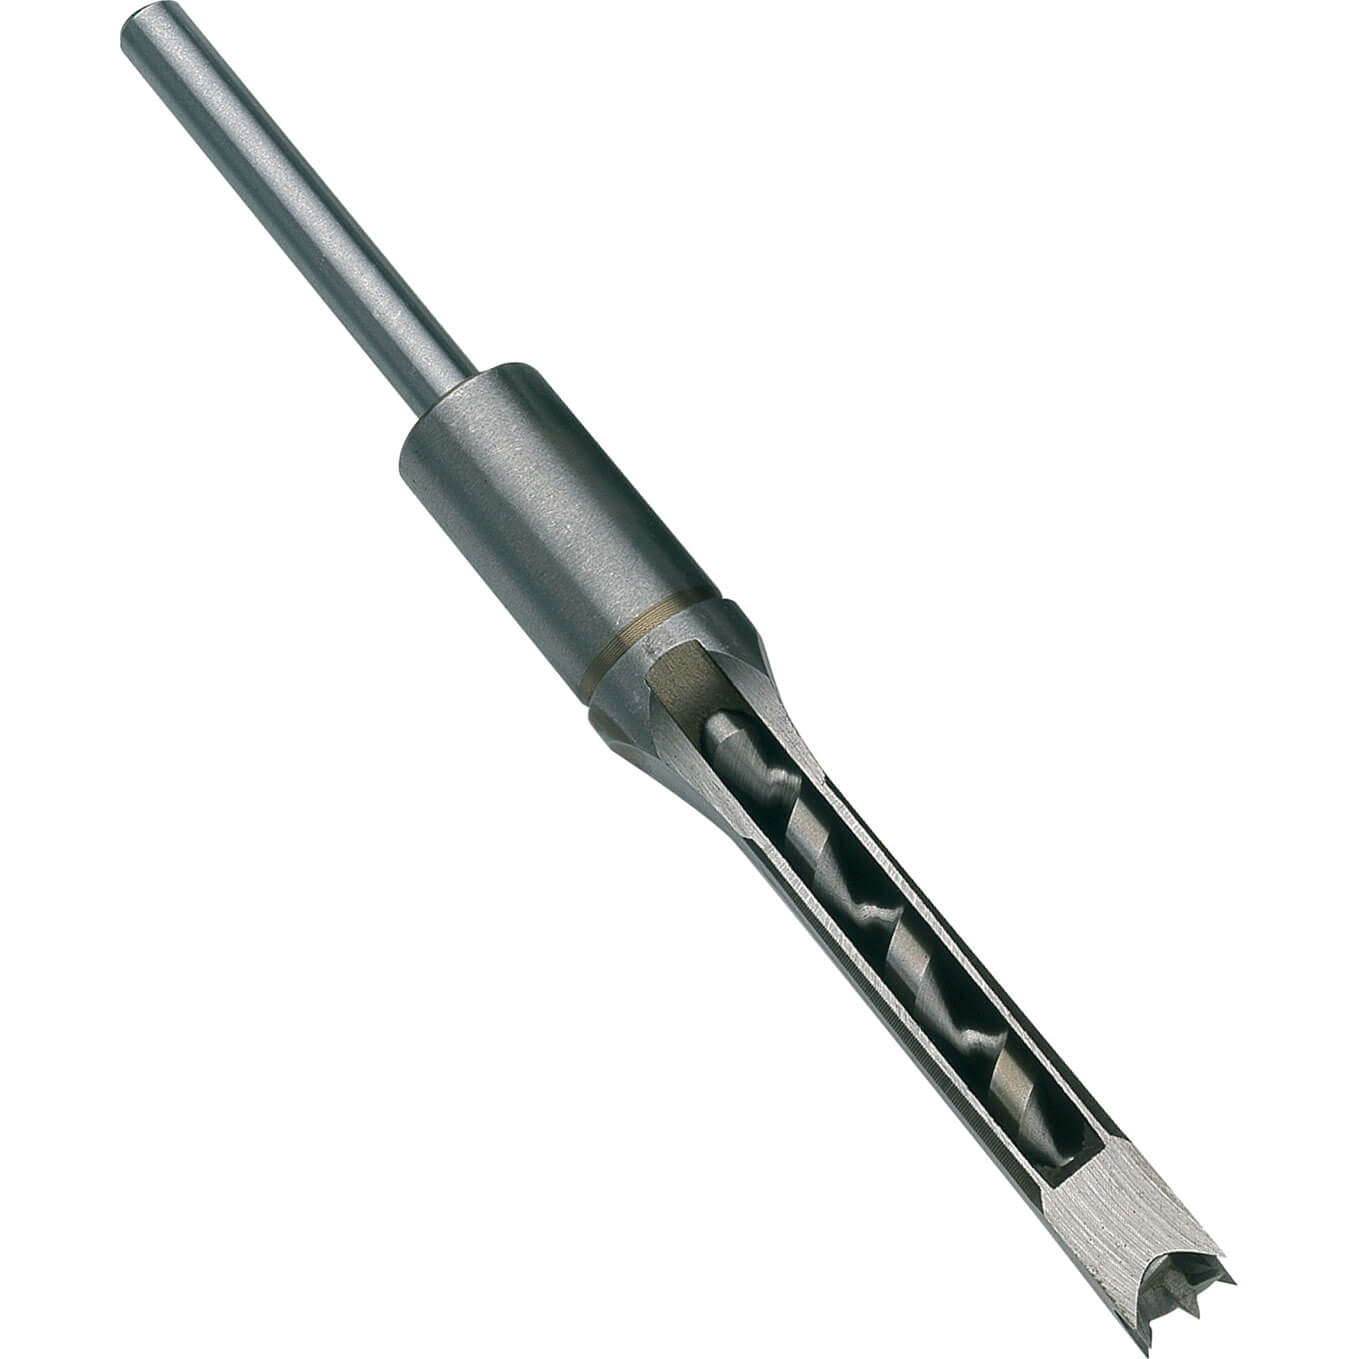 Image of Record Power Mortice Chisel and Bit 1/2"